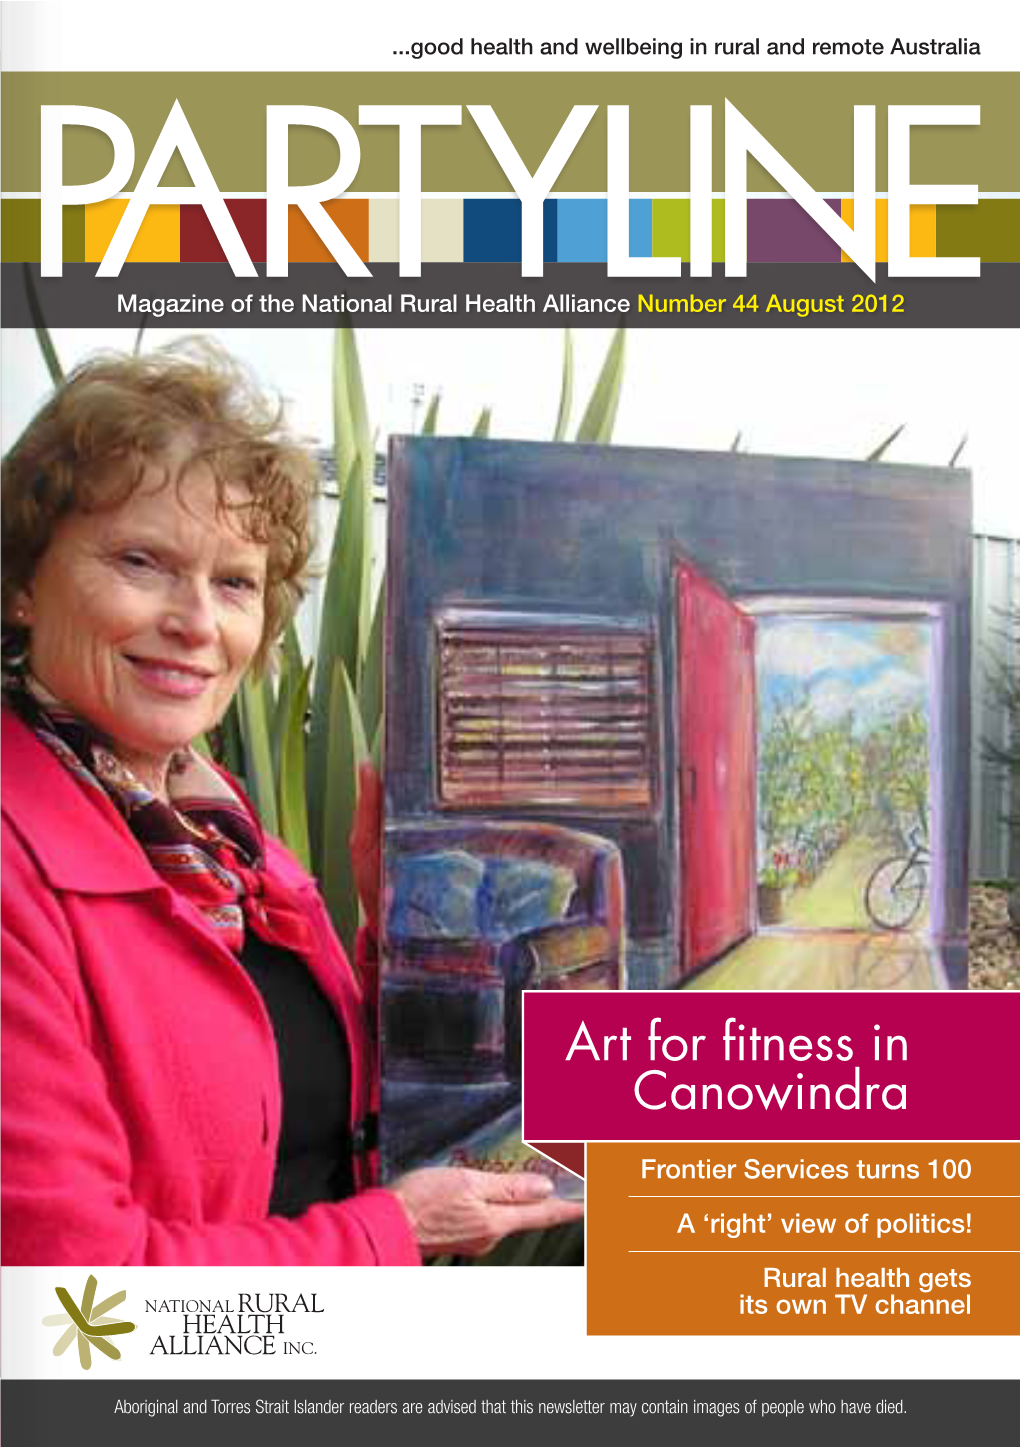 Art for Fitness in Canowindra